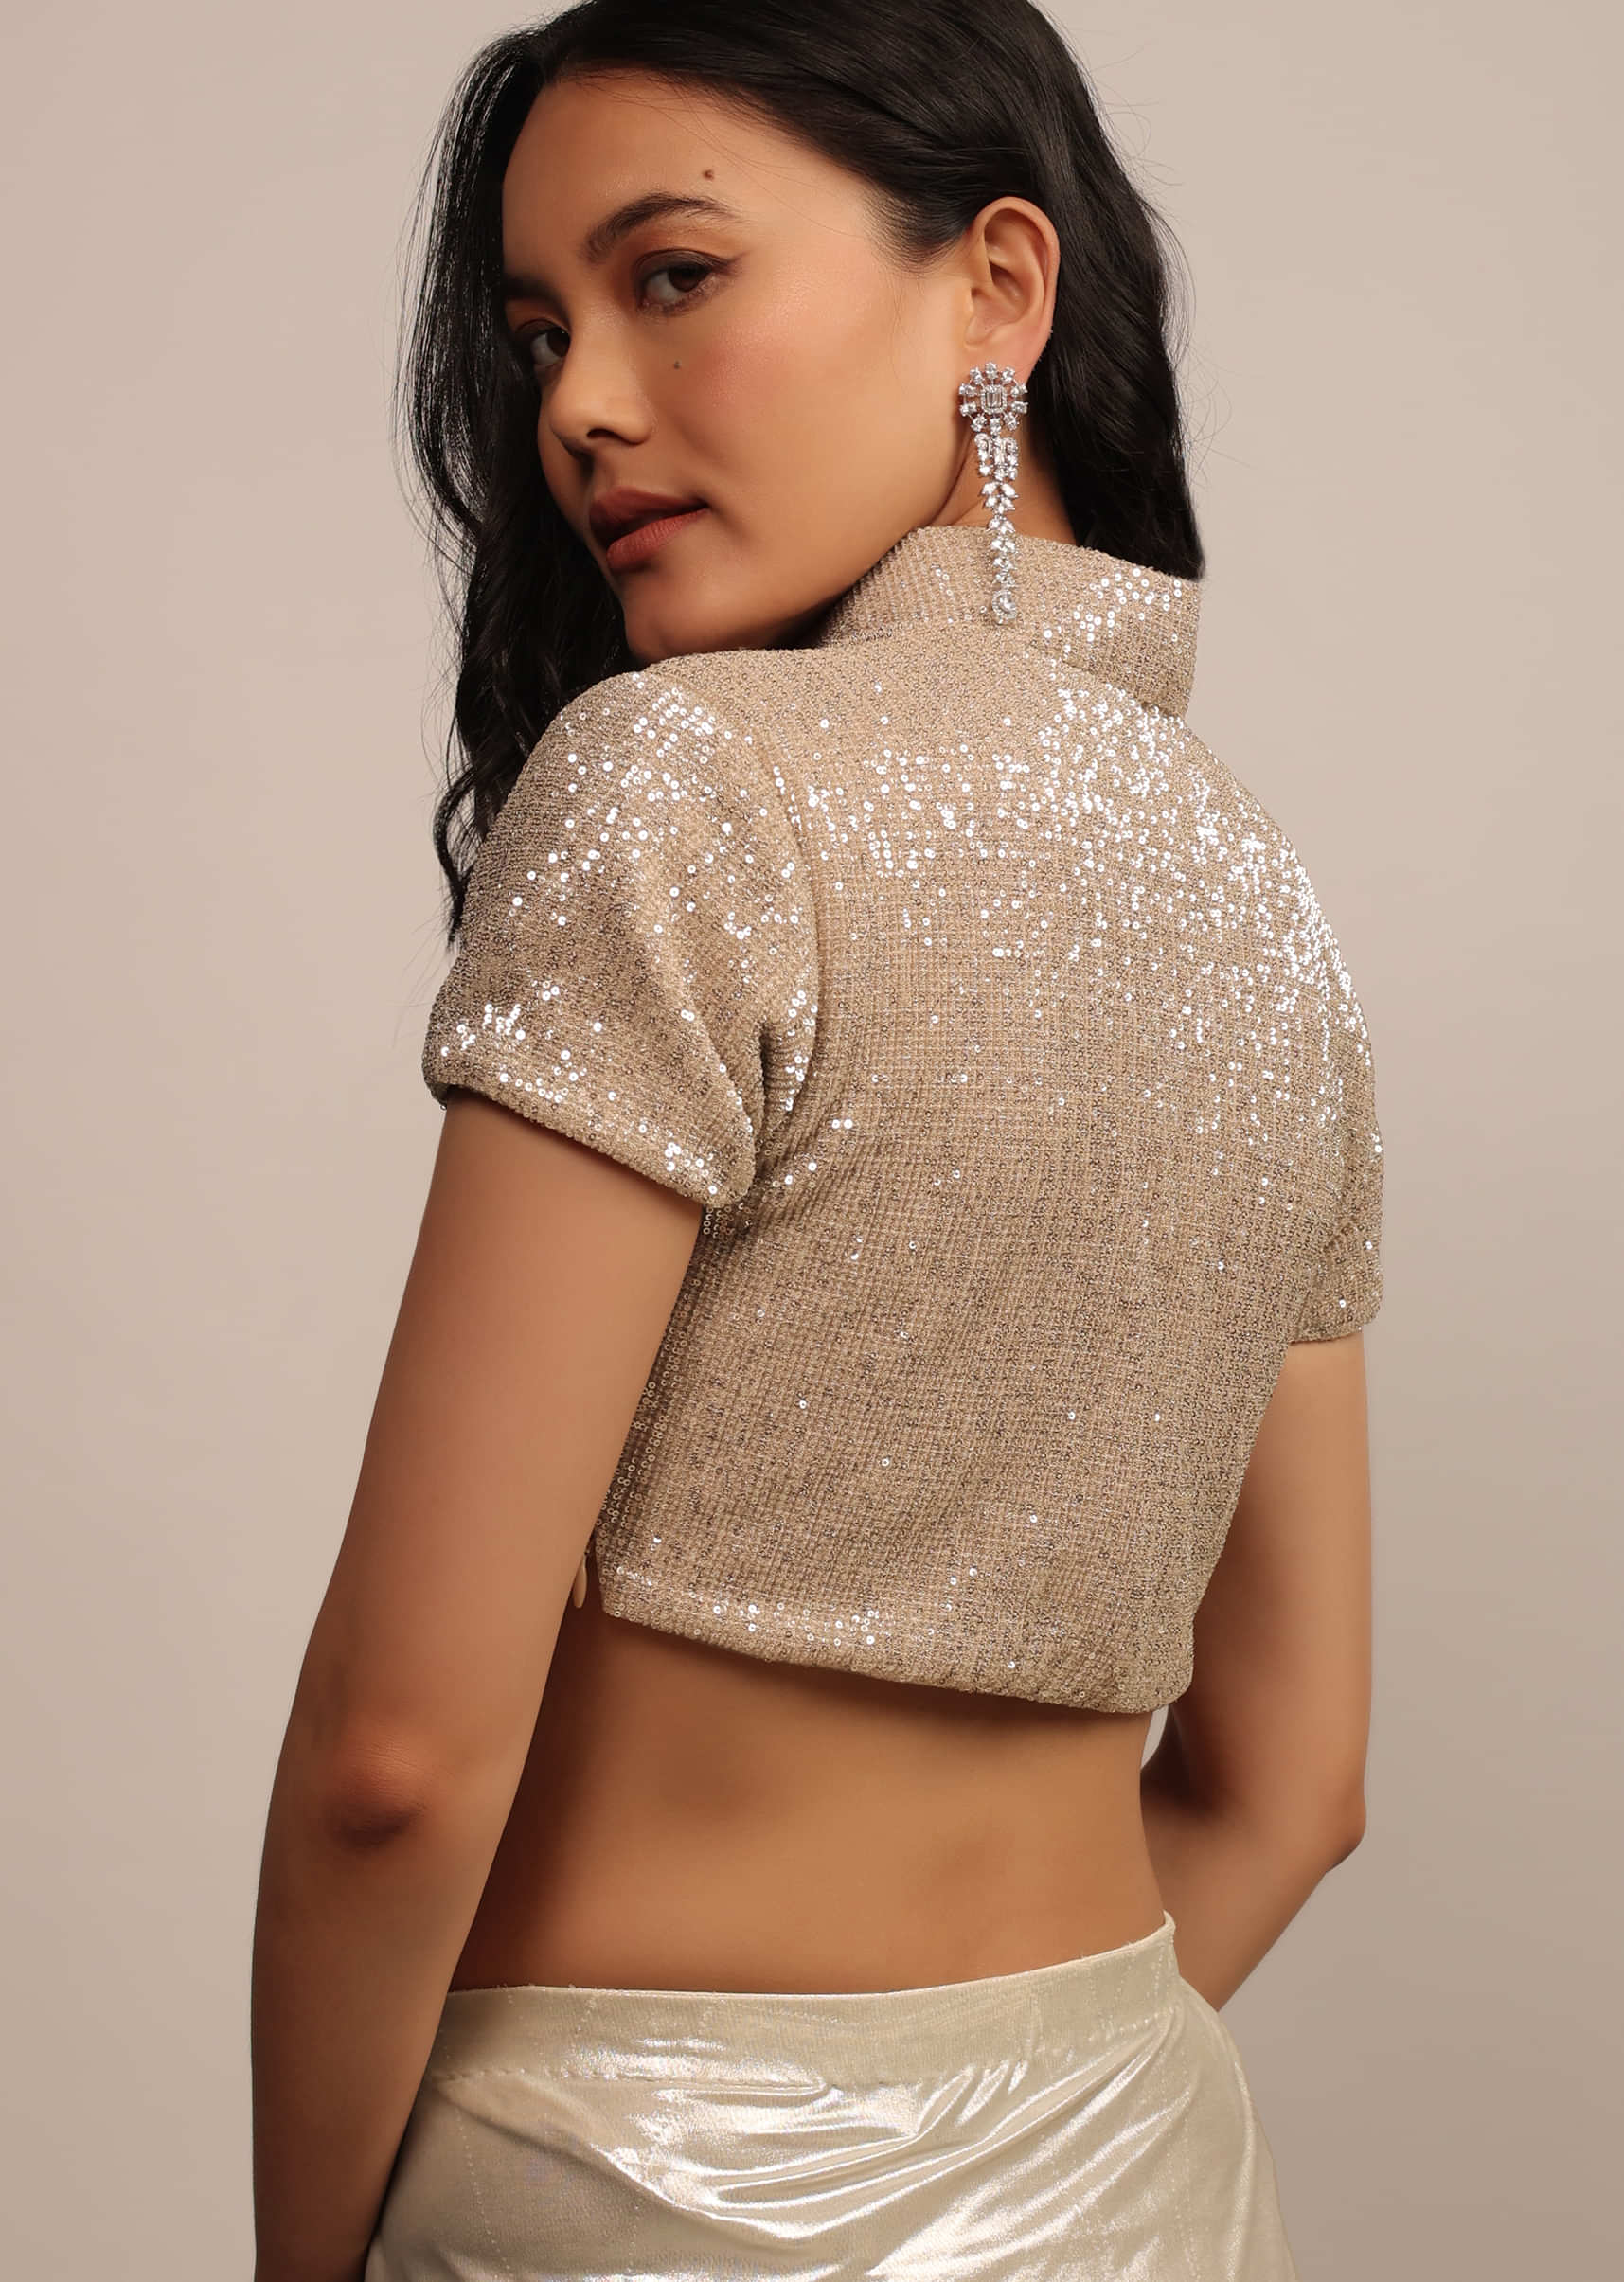 Glittery Golden Blouse In Sequins And A Collared V Neckline